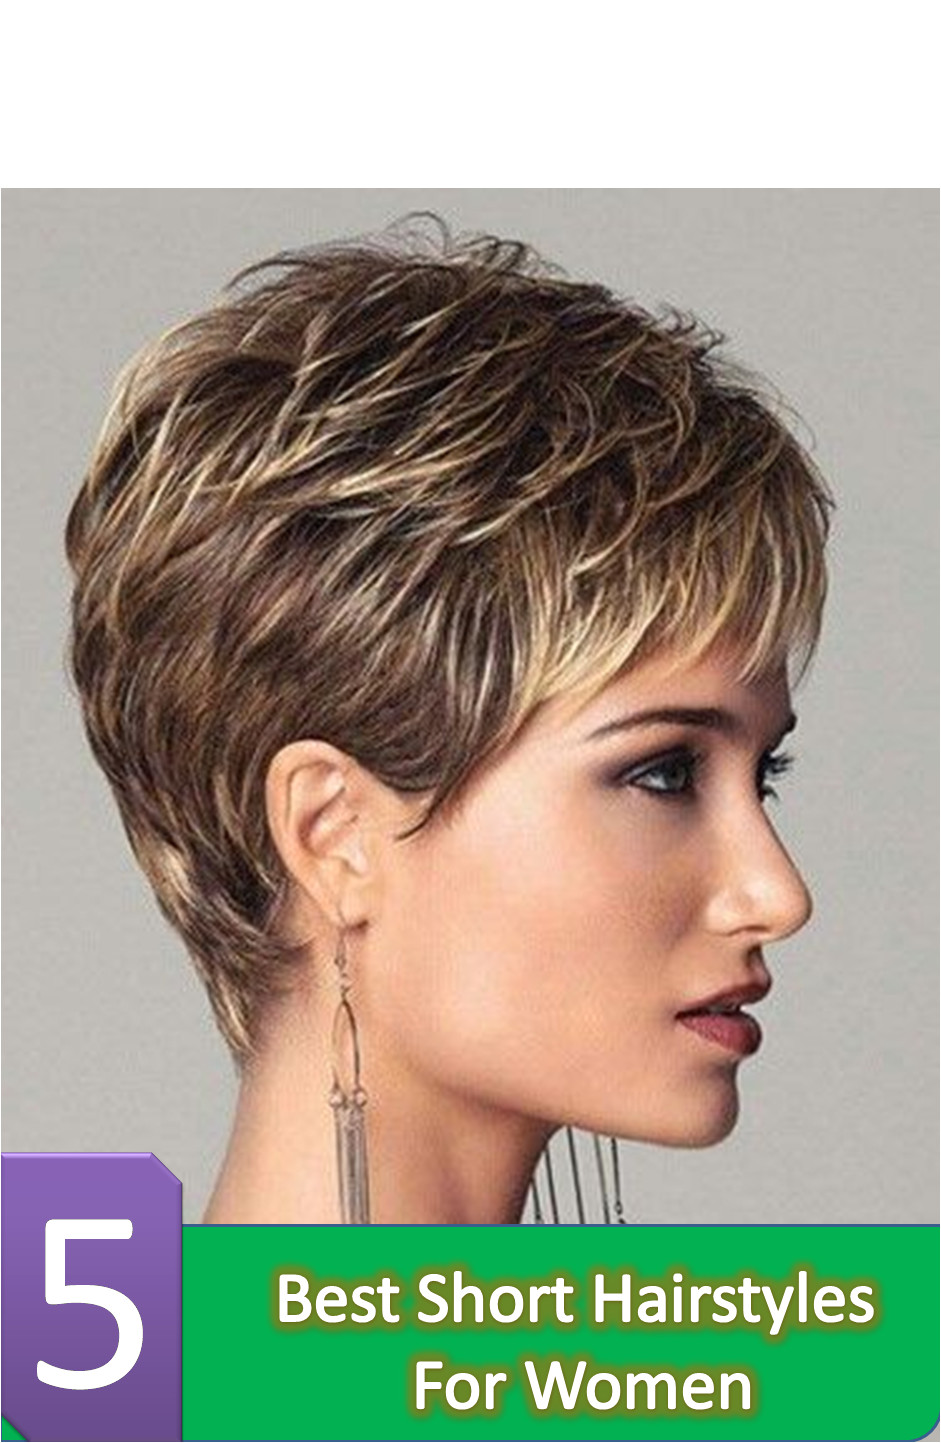 If you want to elegant look at the same time easy maintenance of your hair no doubt short hairstyles for women will be your wise choice